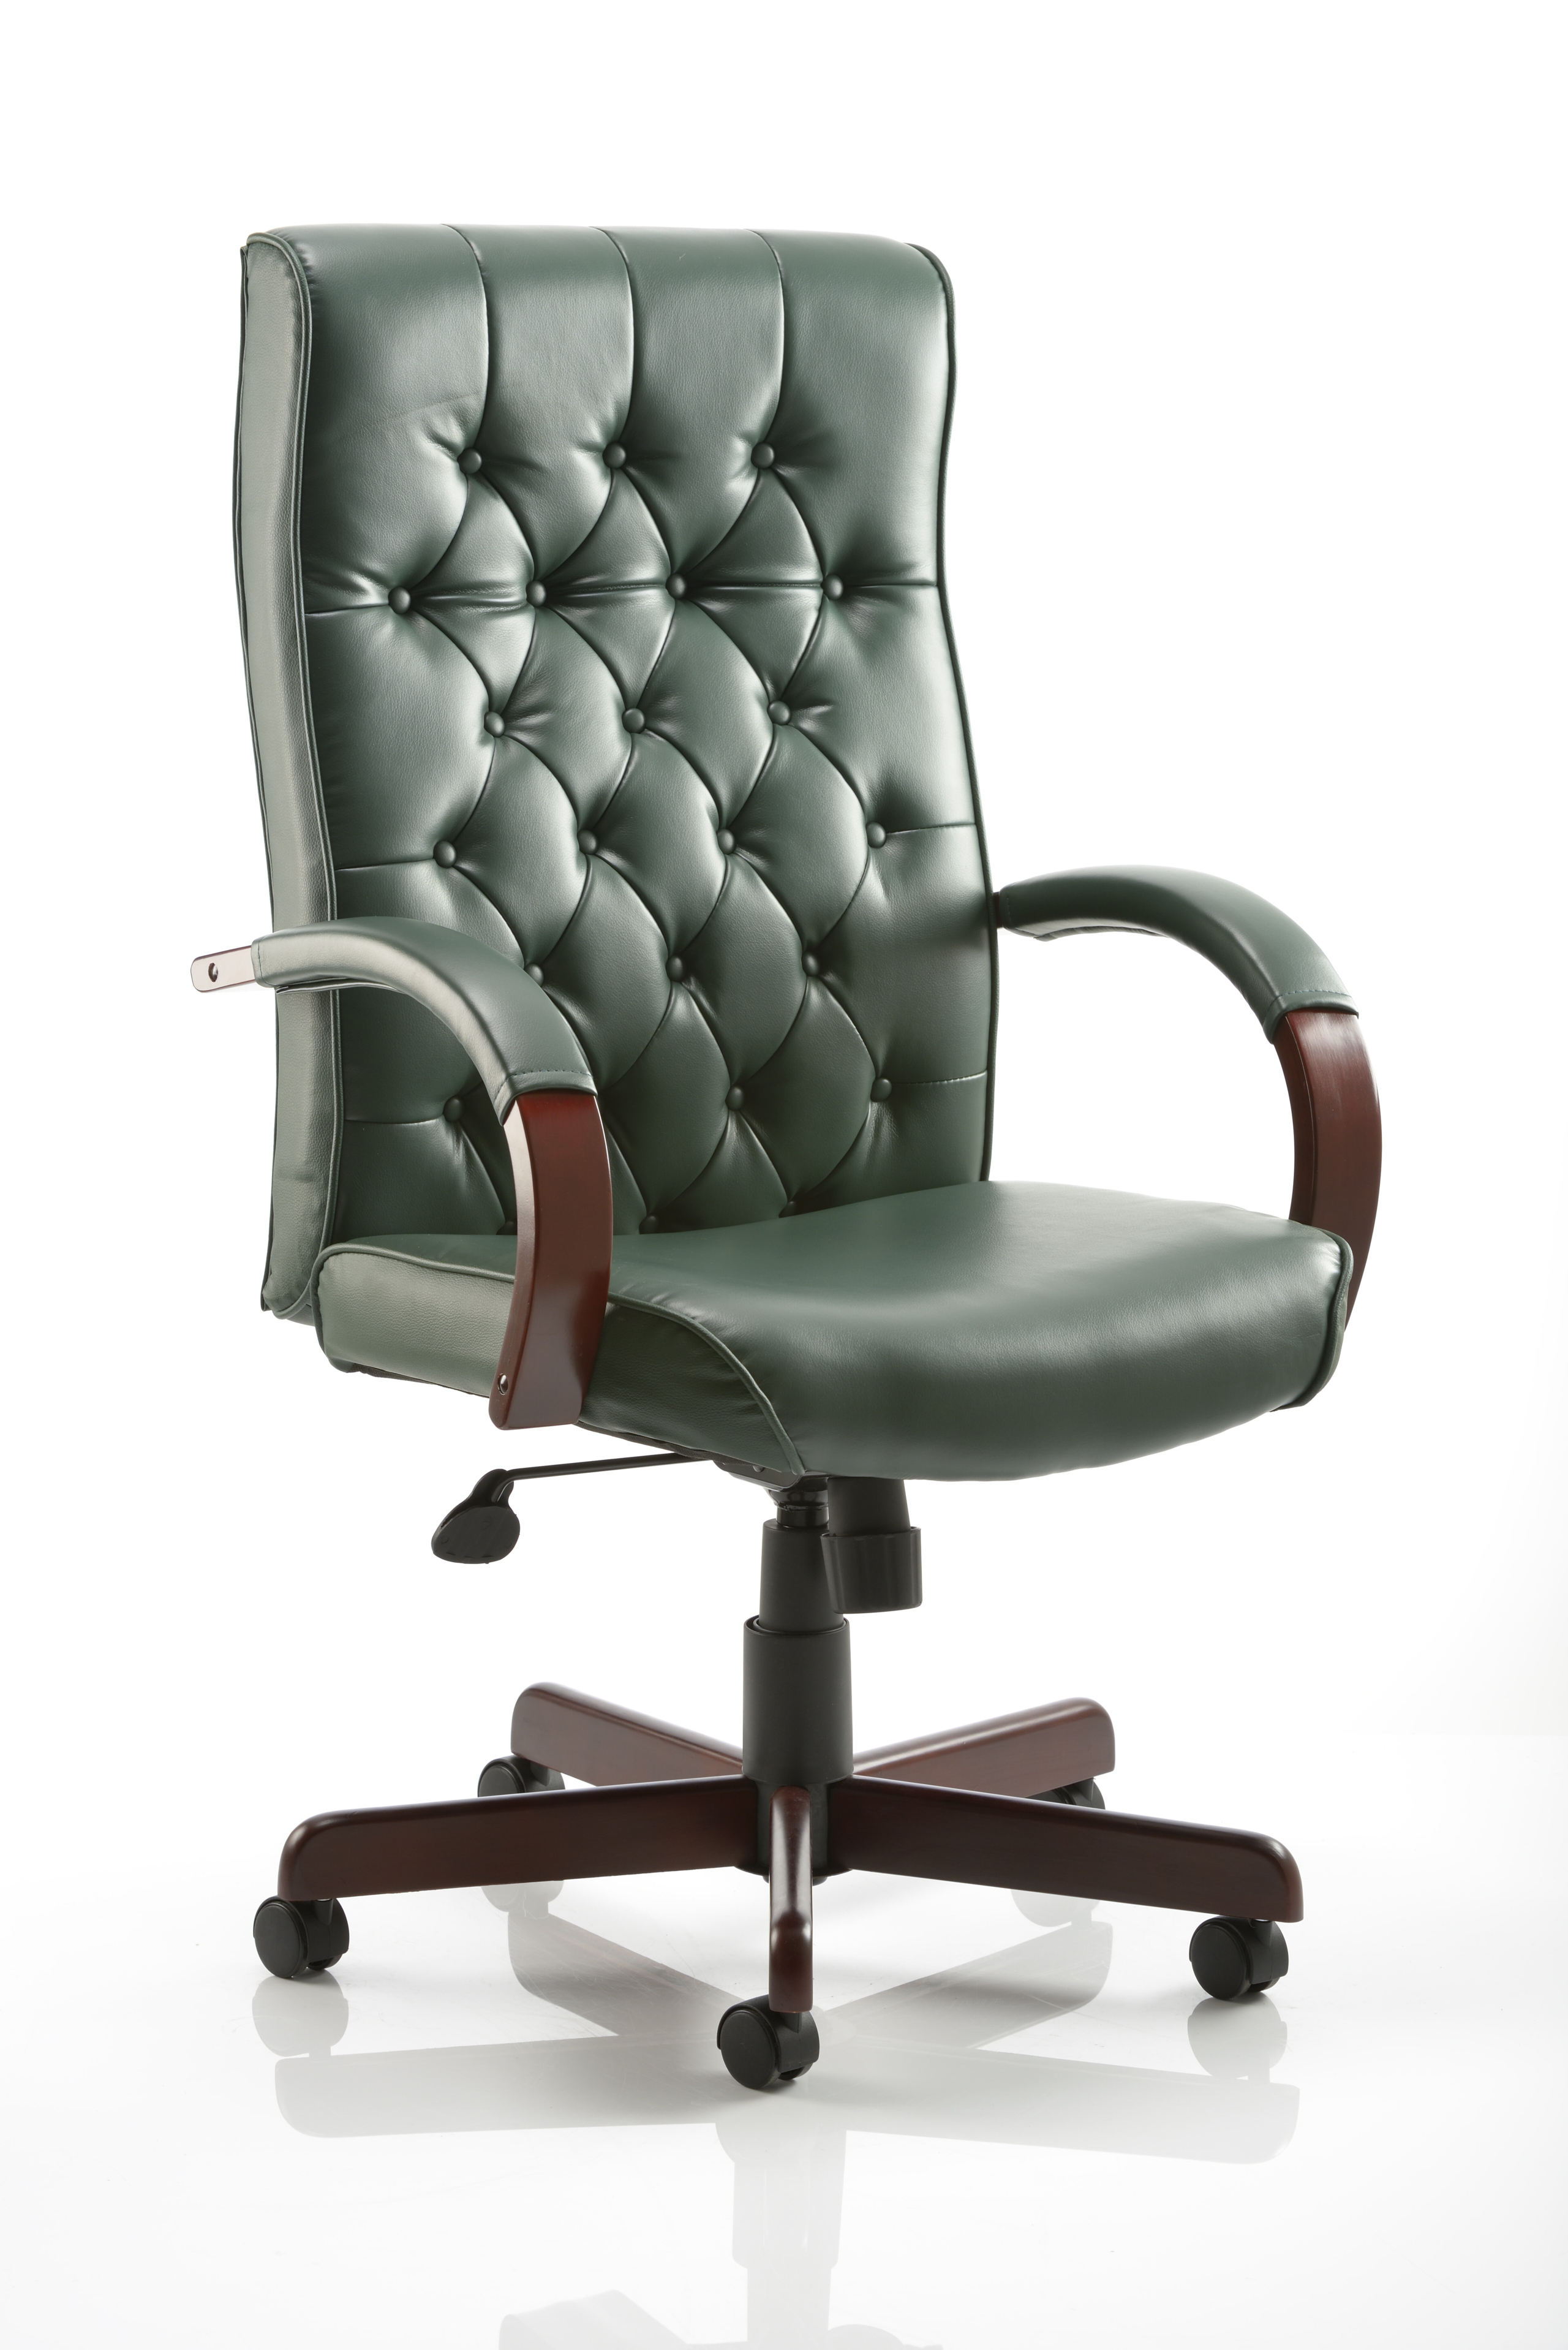 Orthopedic Office Chairs - Foter